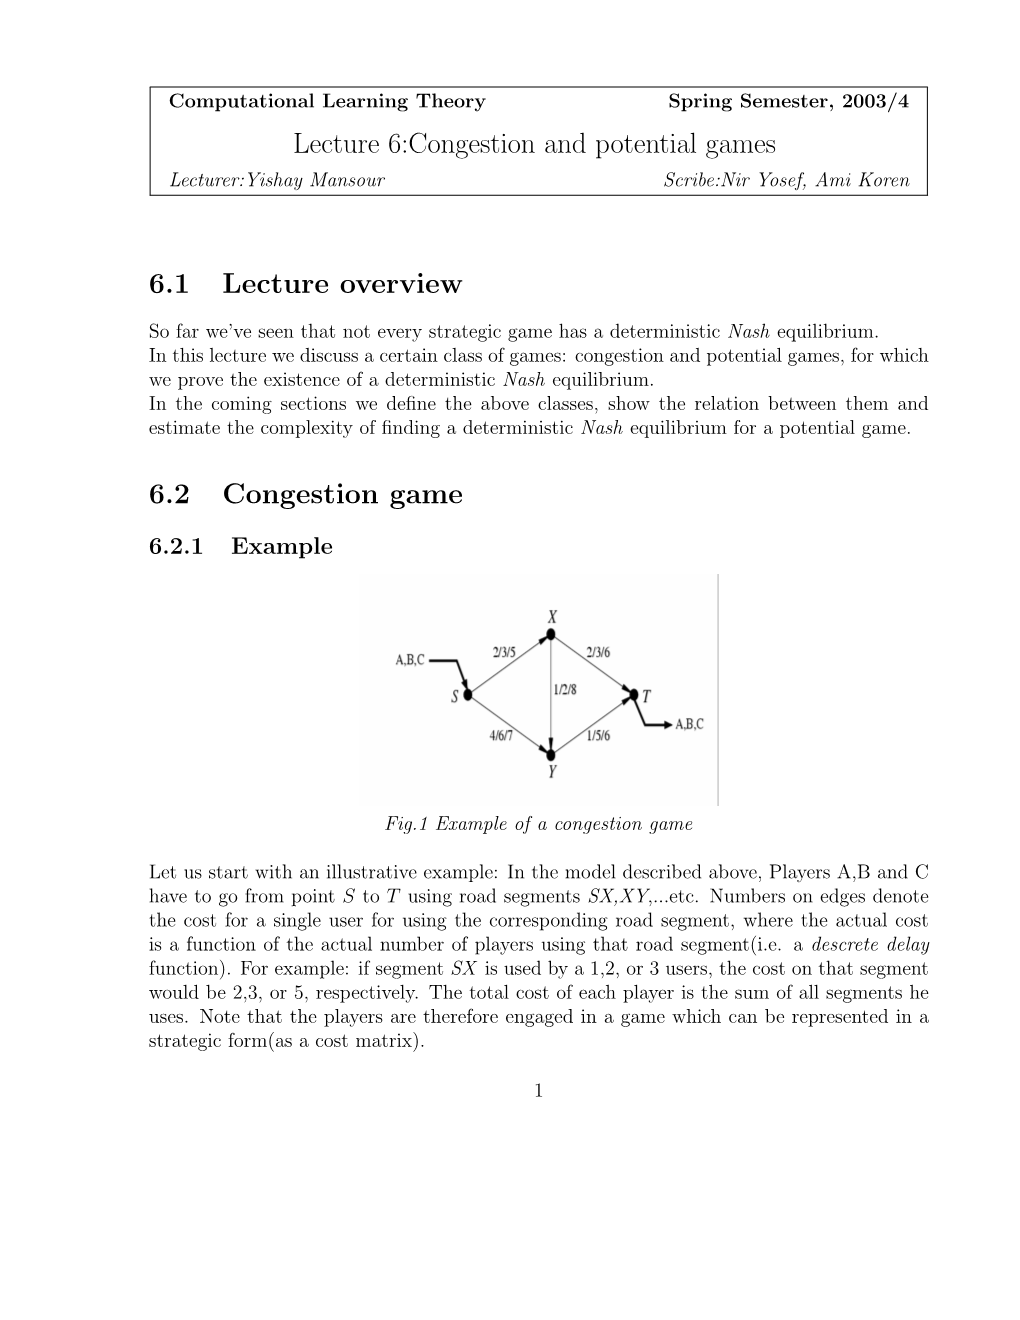 Lecture 6:Congestion and Potential Games 6.1 Lecture Overview 6.2